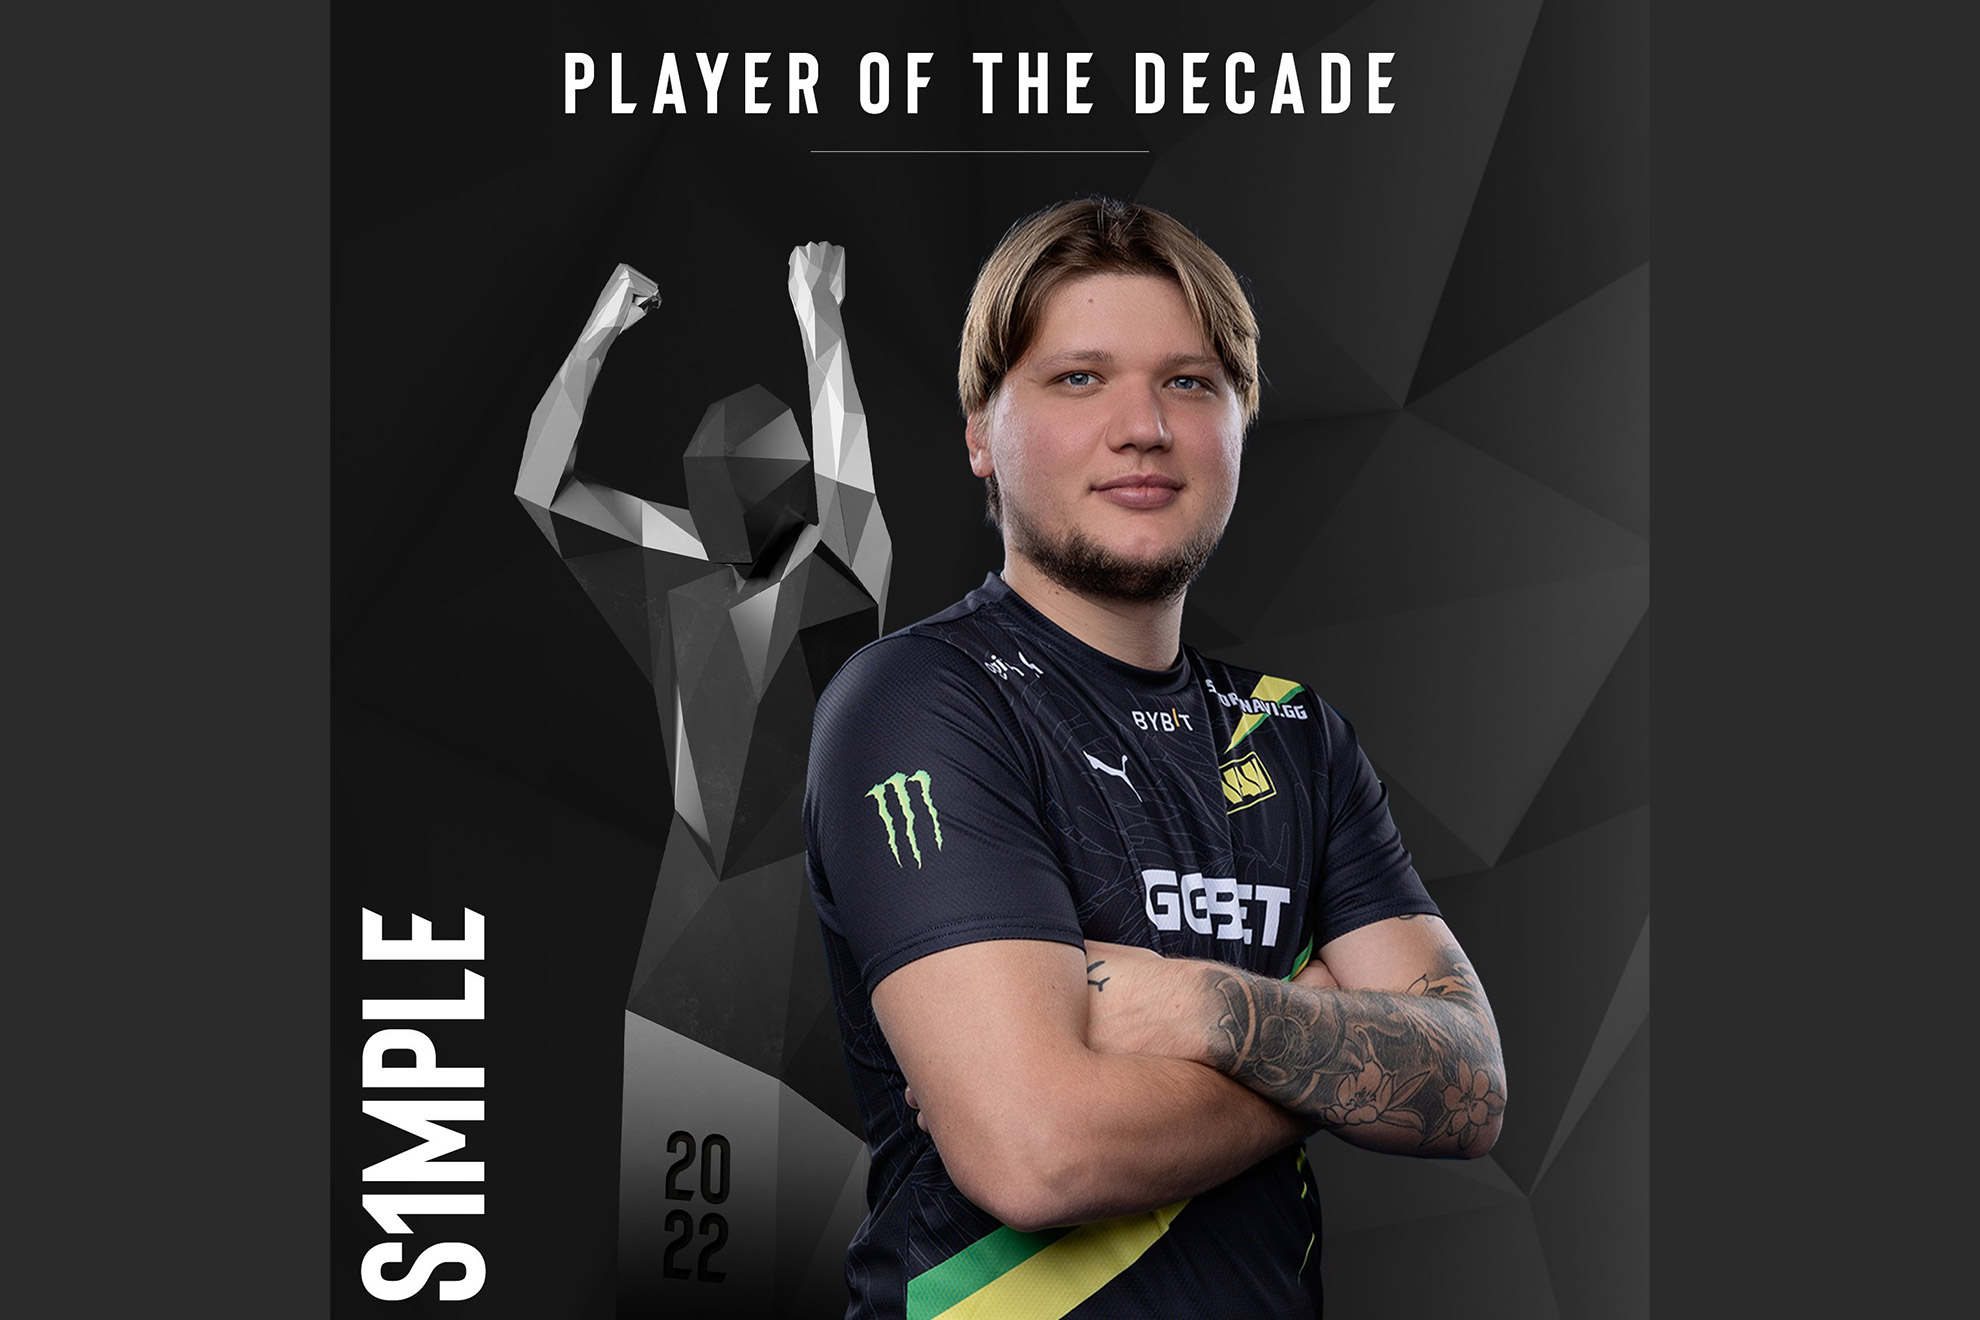 s1mple, player of decade